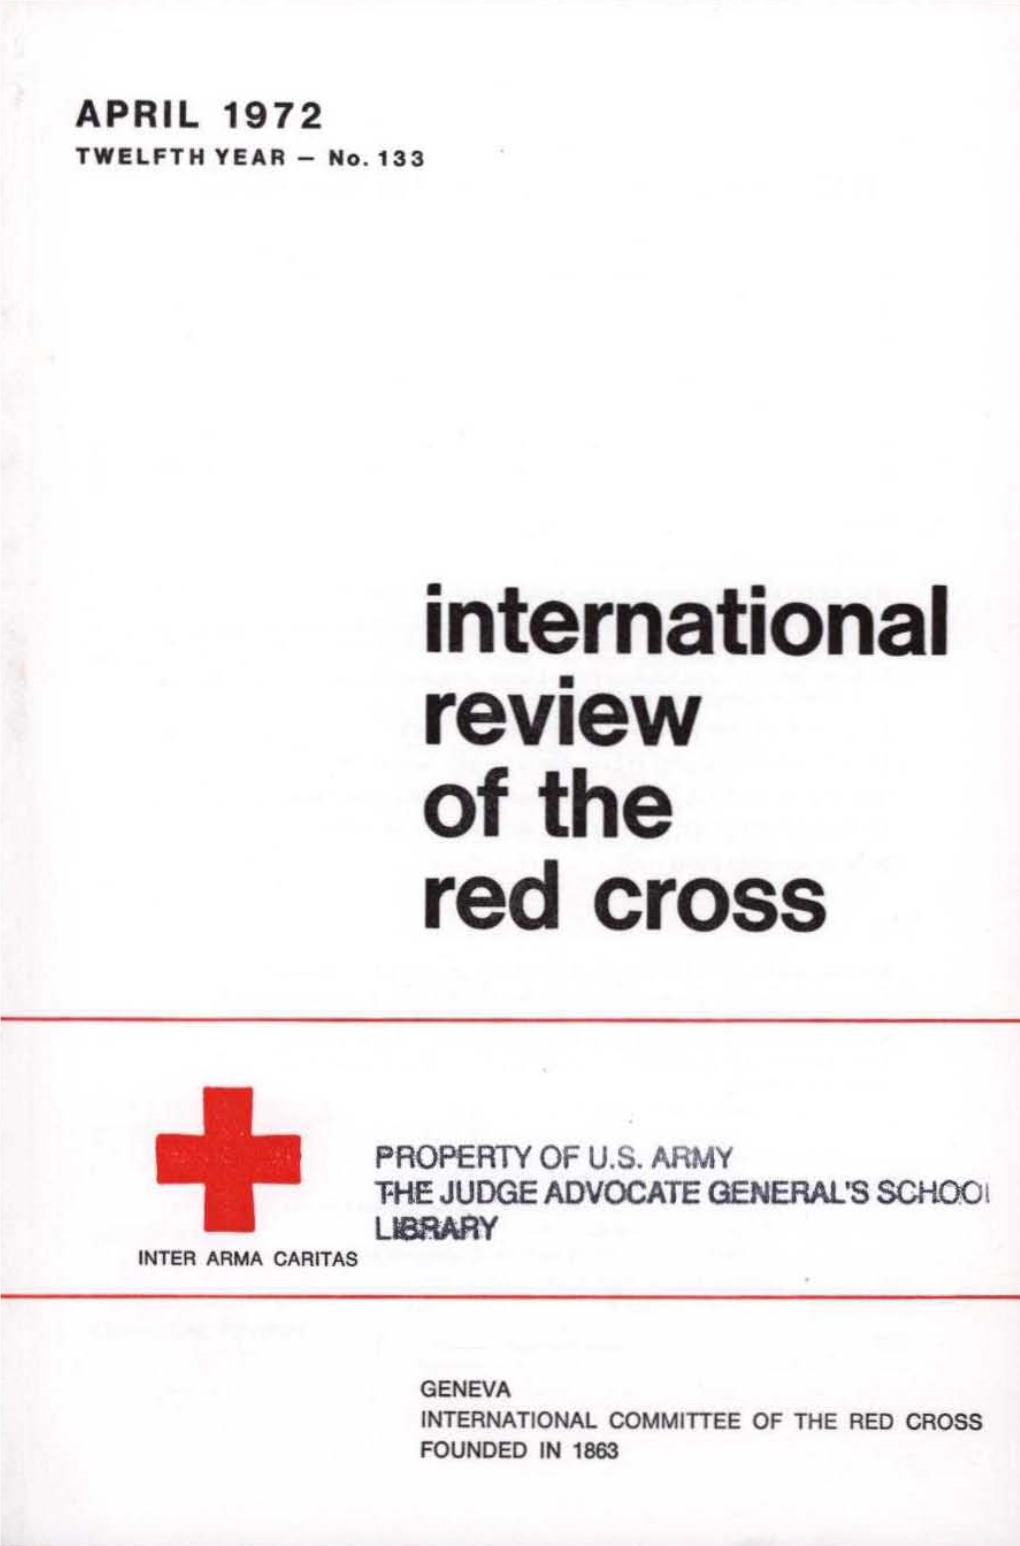 International Review of the Red Cross, April 1972, Twelfth Year